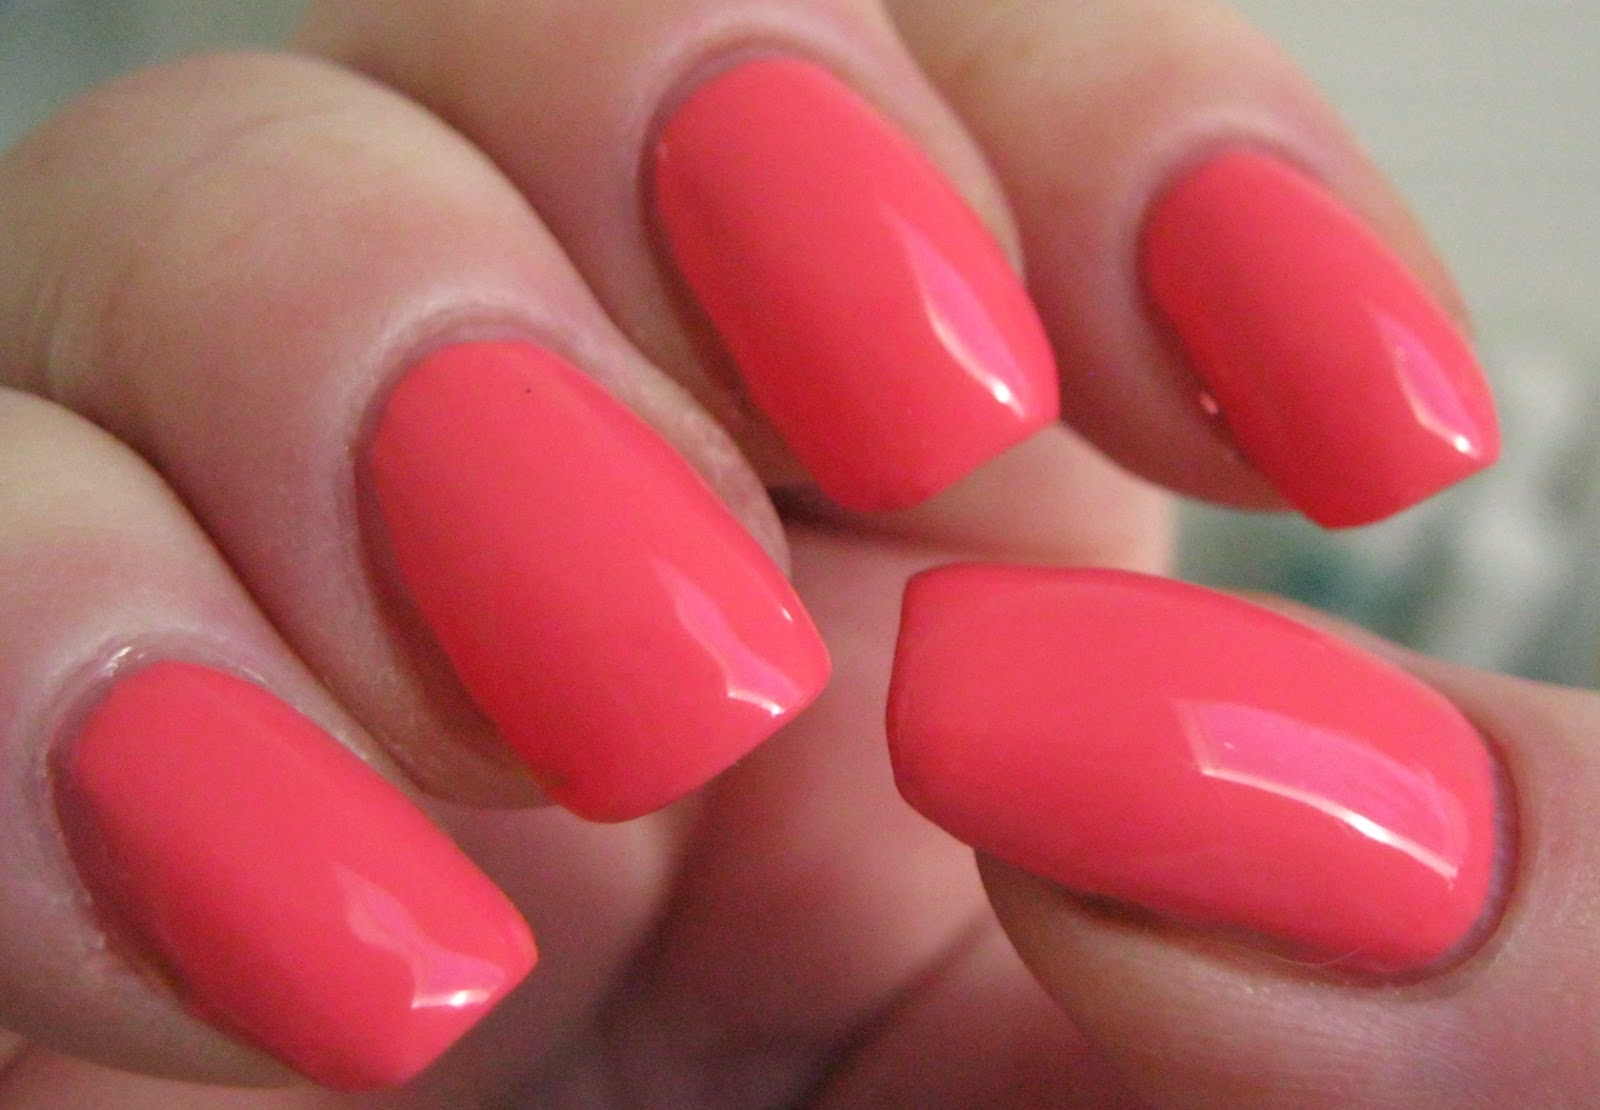 9. Butter London Nail Lacquer in "Trout Pout" - wide 7